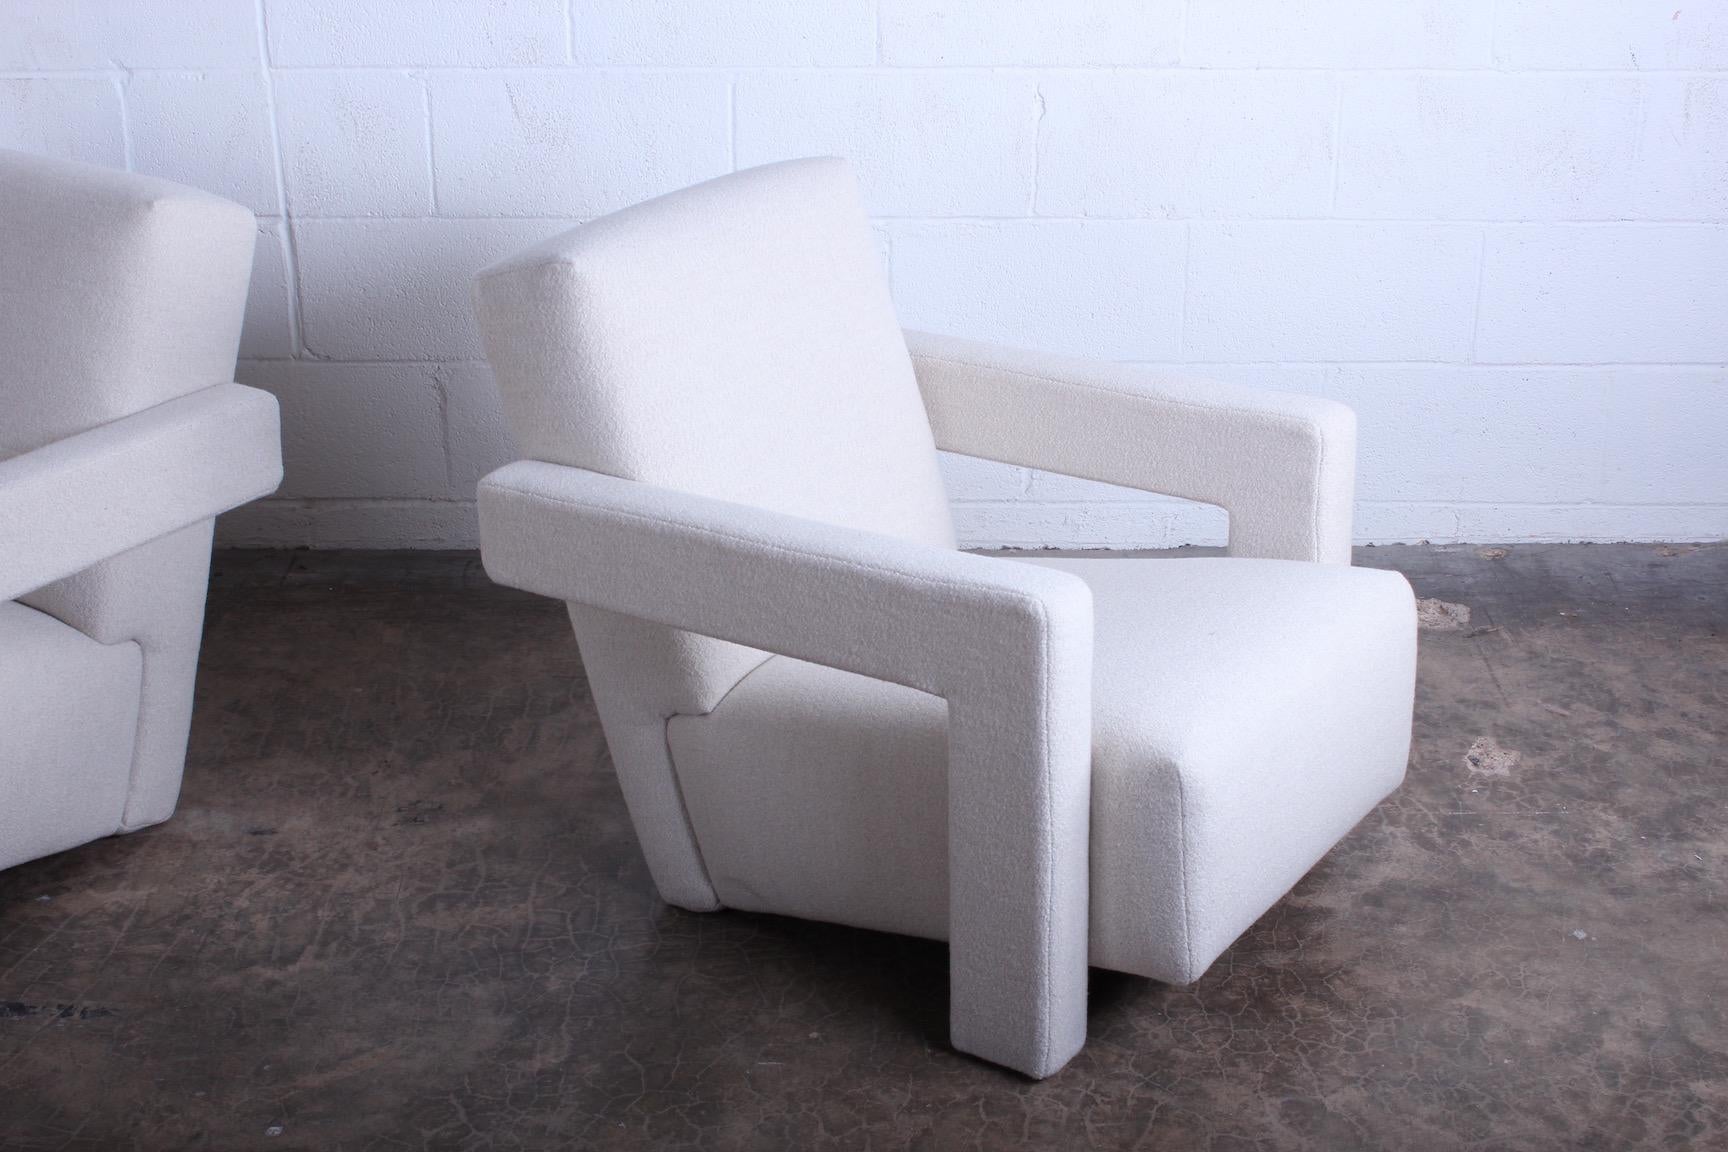 A pair of Utrecht lounge chairs designed by Gerrit Rietveld and produced by Cassina, 1980s. Fully restored and upholstered in a boucle fabric.